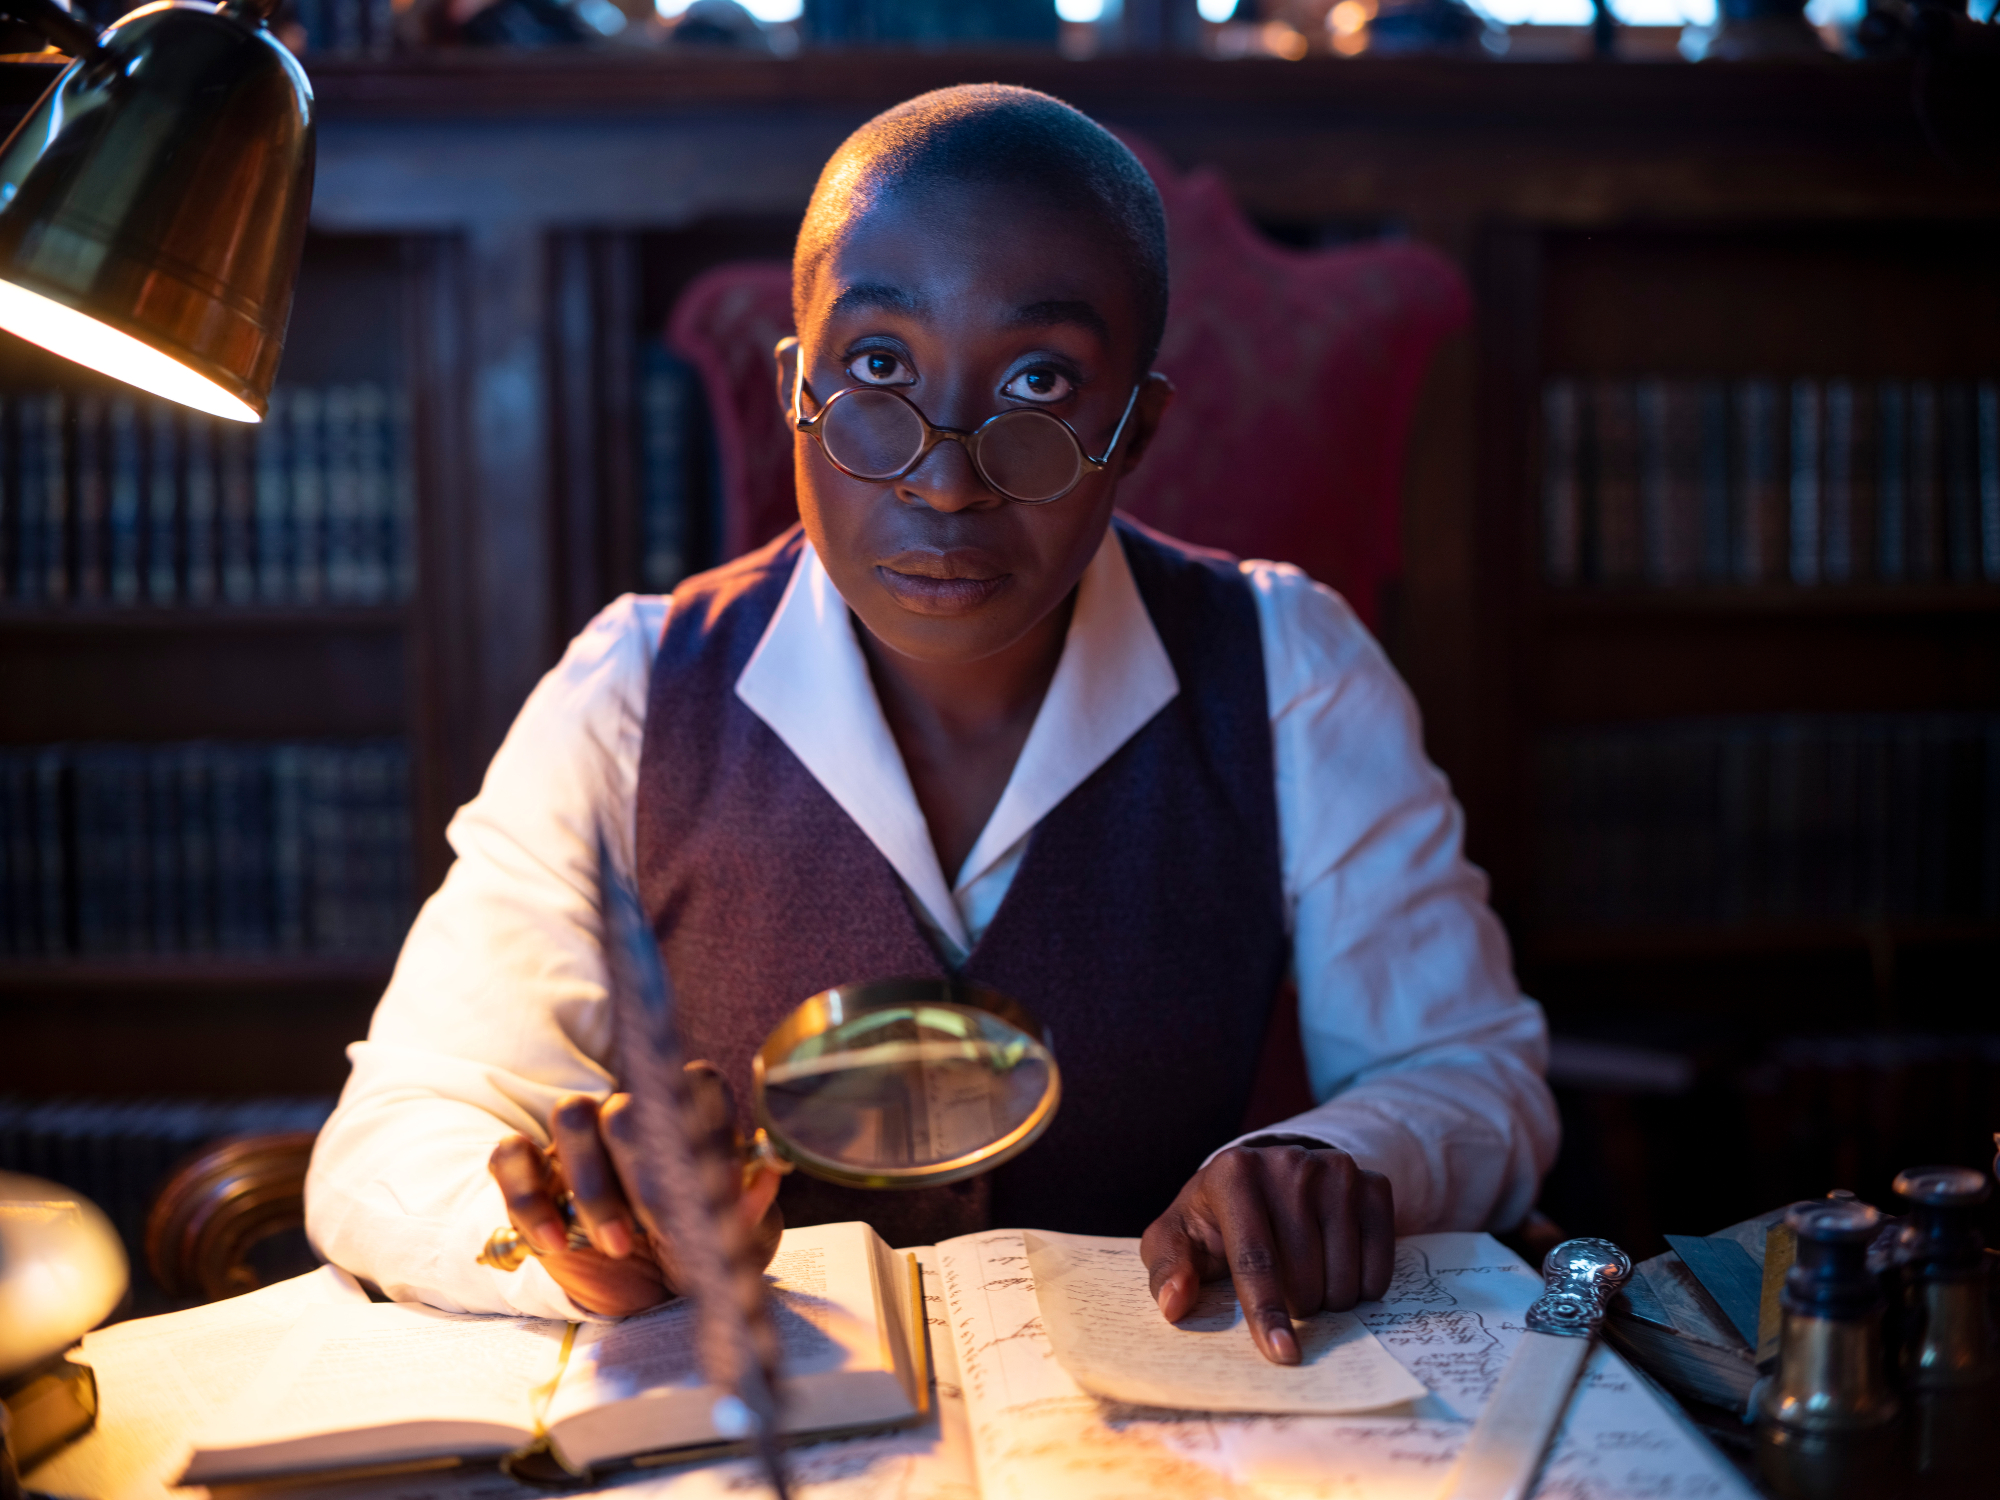 Vivienne Acheampong as Lucien in the cast of 'The Sandman.' She's sitting at a desk with papers in front of her.